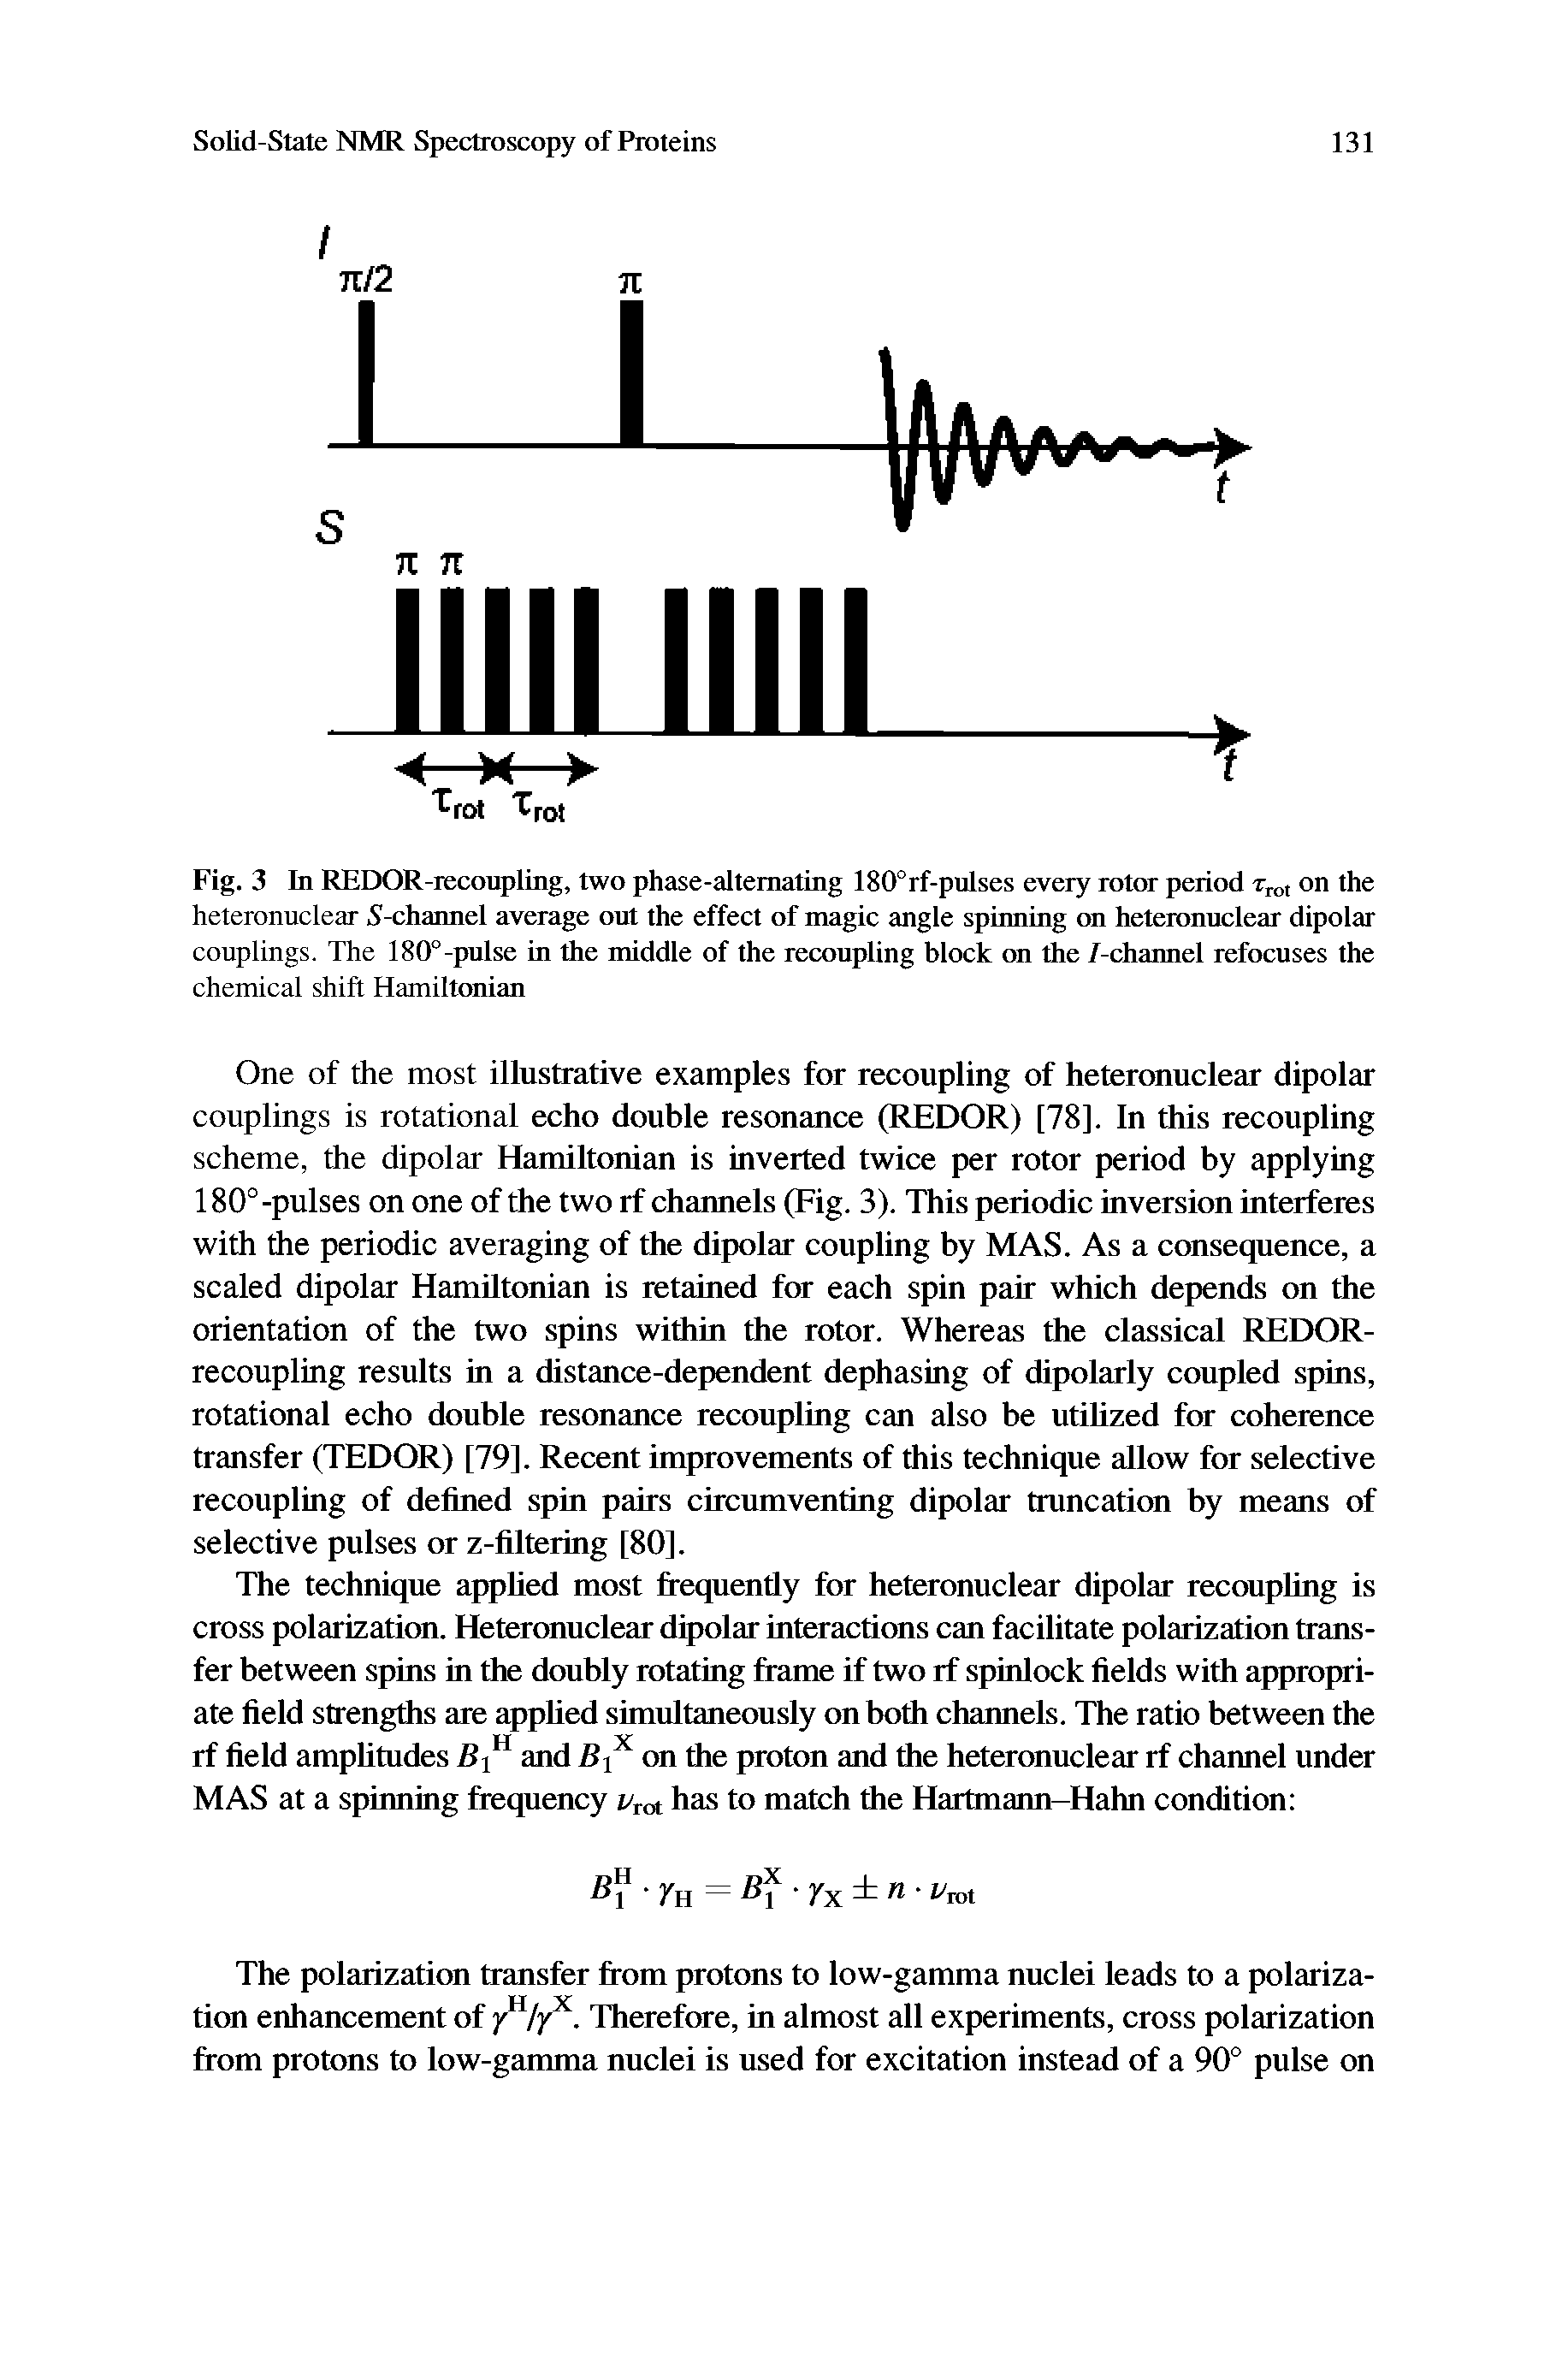 Fig. 3 In REDOR-recoupling, two phase-alternating 180°rf-pulses every rota- period on the heteronuclear 5-channel average ont the effect of magic angle spinning on heteronuclear dipolar couplings. The 180°-pulse in the middle of the recoupling block on the /-channel refocuses the...